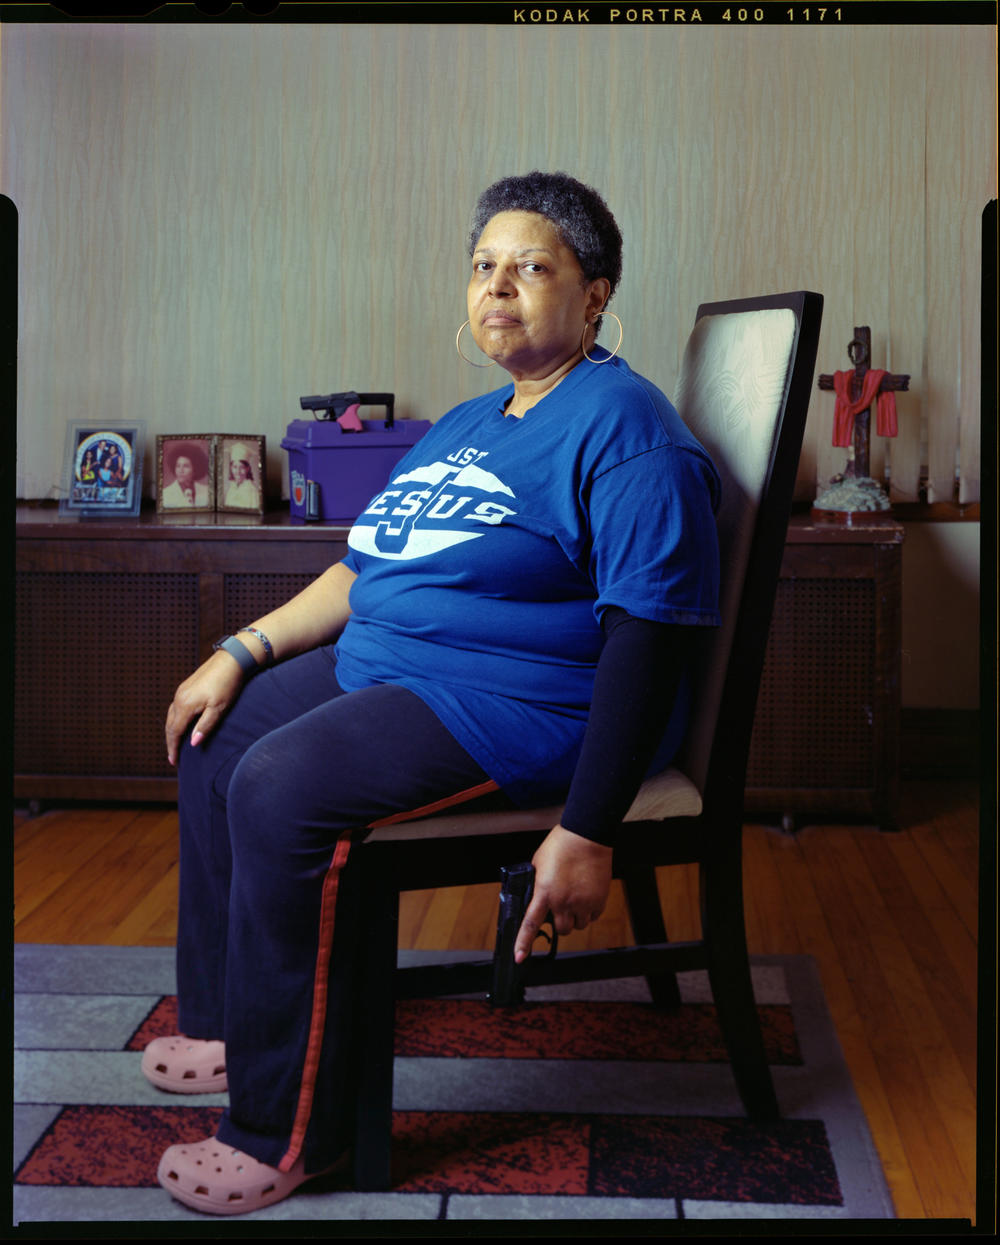 Angela Ross Williams, 67, in her living room on Wednesday, July 13, 2022, in Chicago. Williams says she needs her firearm because there is a lot of crime in Chicago, which stems from a lack of housing, food, jobs and access to mental health facilities.